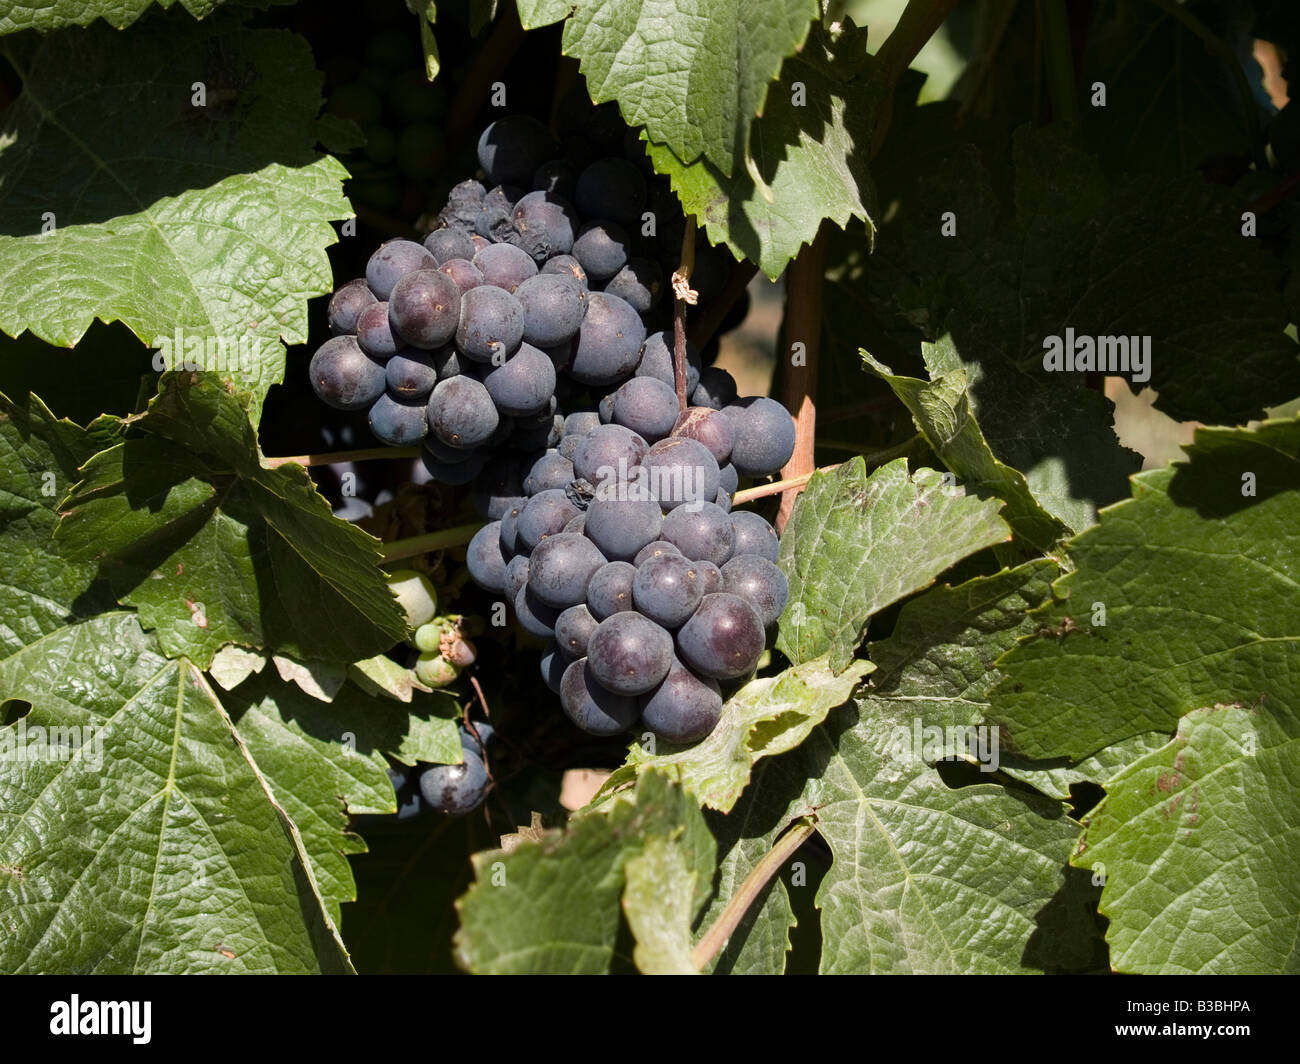 Pinot noir grapes growing on a grapevine at Chard Farm vineyard and winery, Central Otago, New Zealand Stock Photo